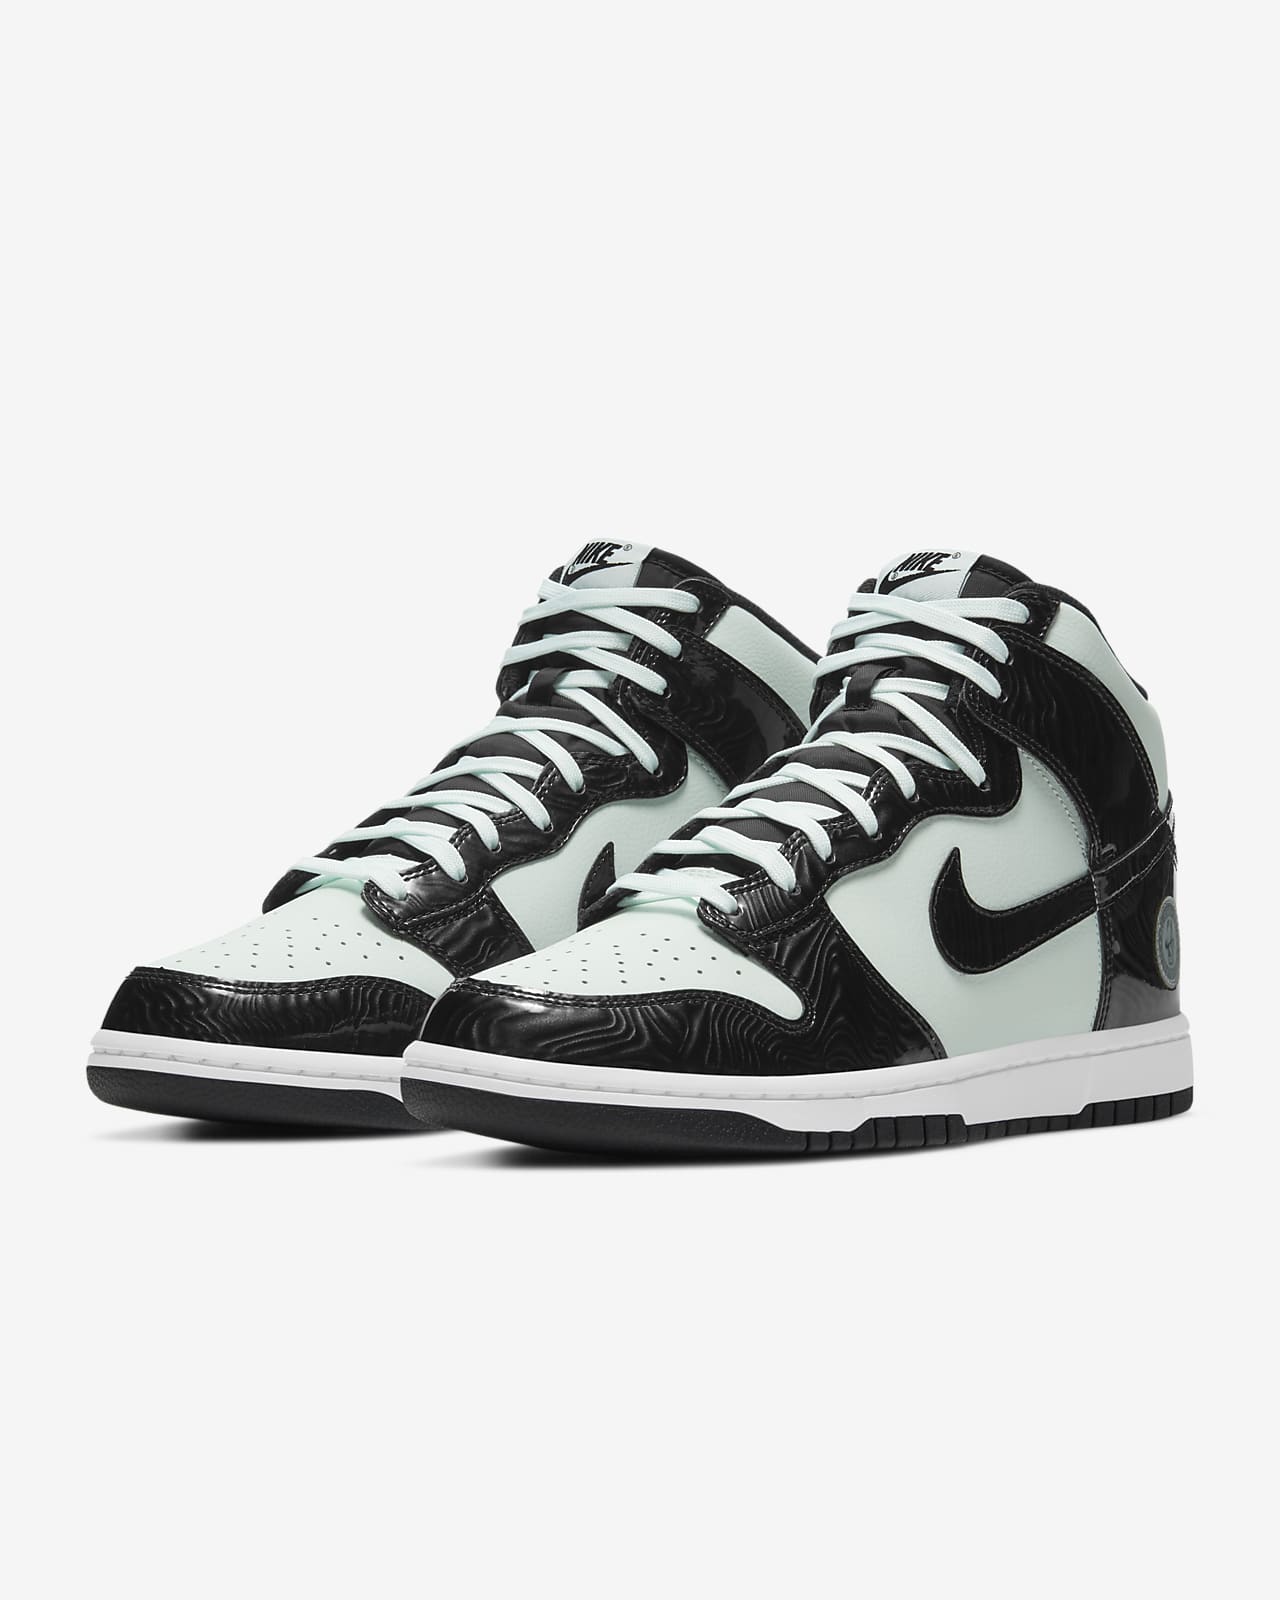 nike dunk high patent leather